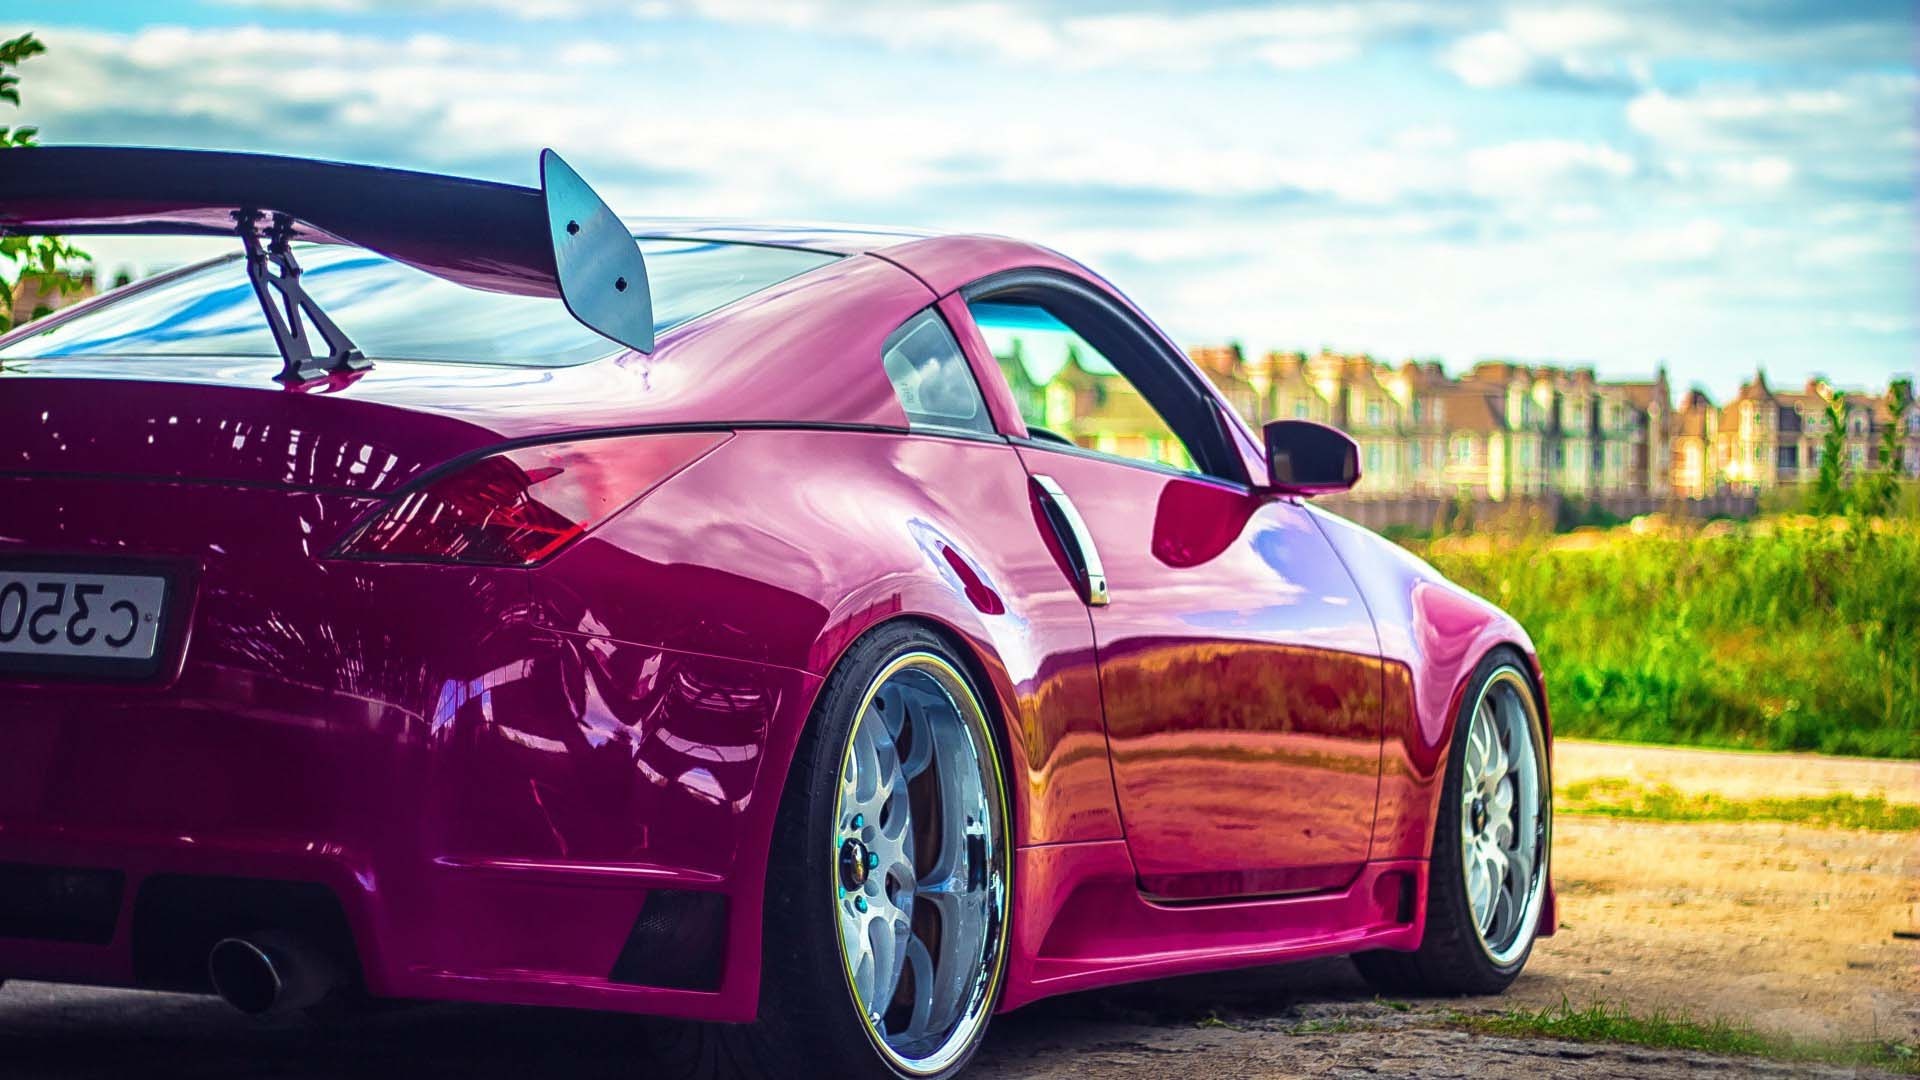 Best Pink Car Wallpaper Full HD Pictures